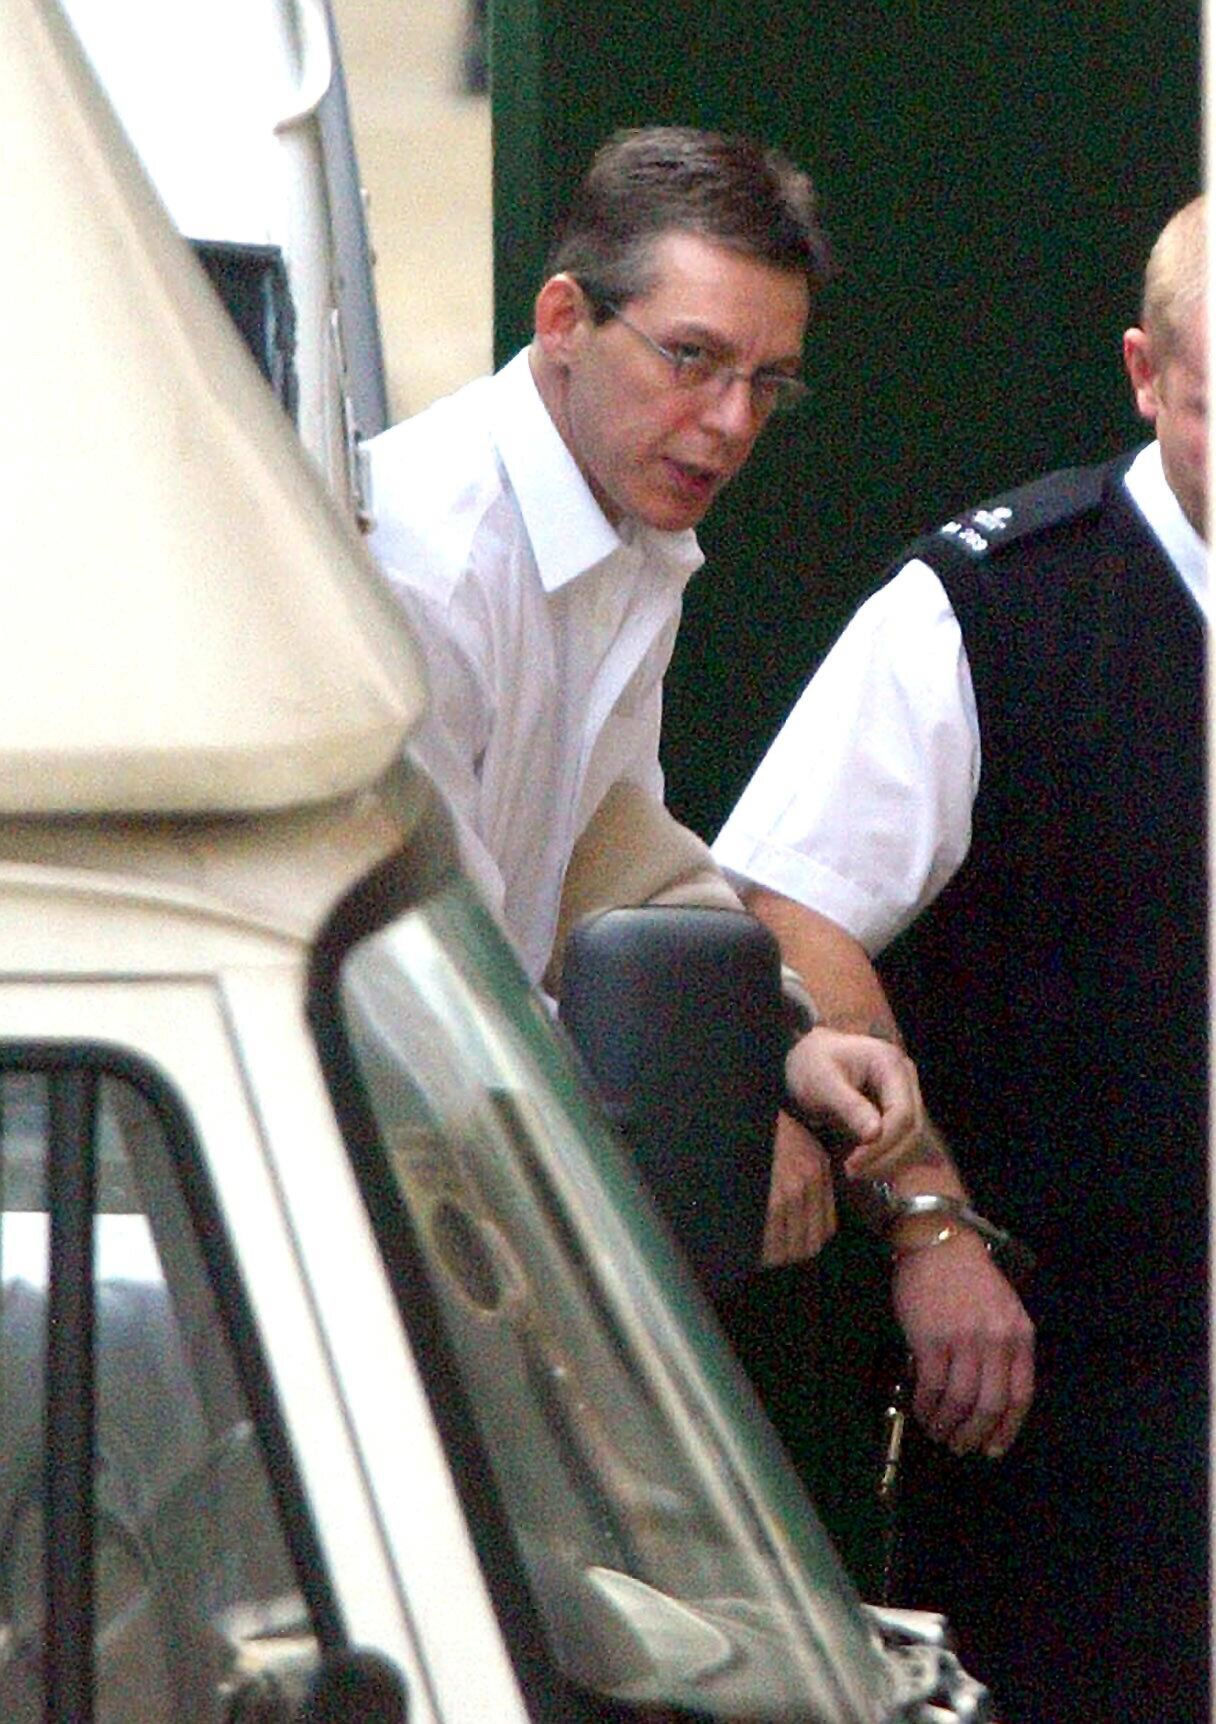 Jeremy Bamber arriving at the Court of Appeal in London in 2002